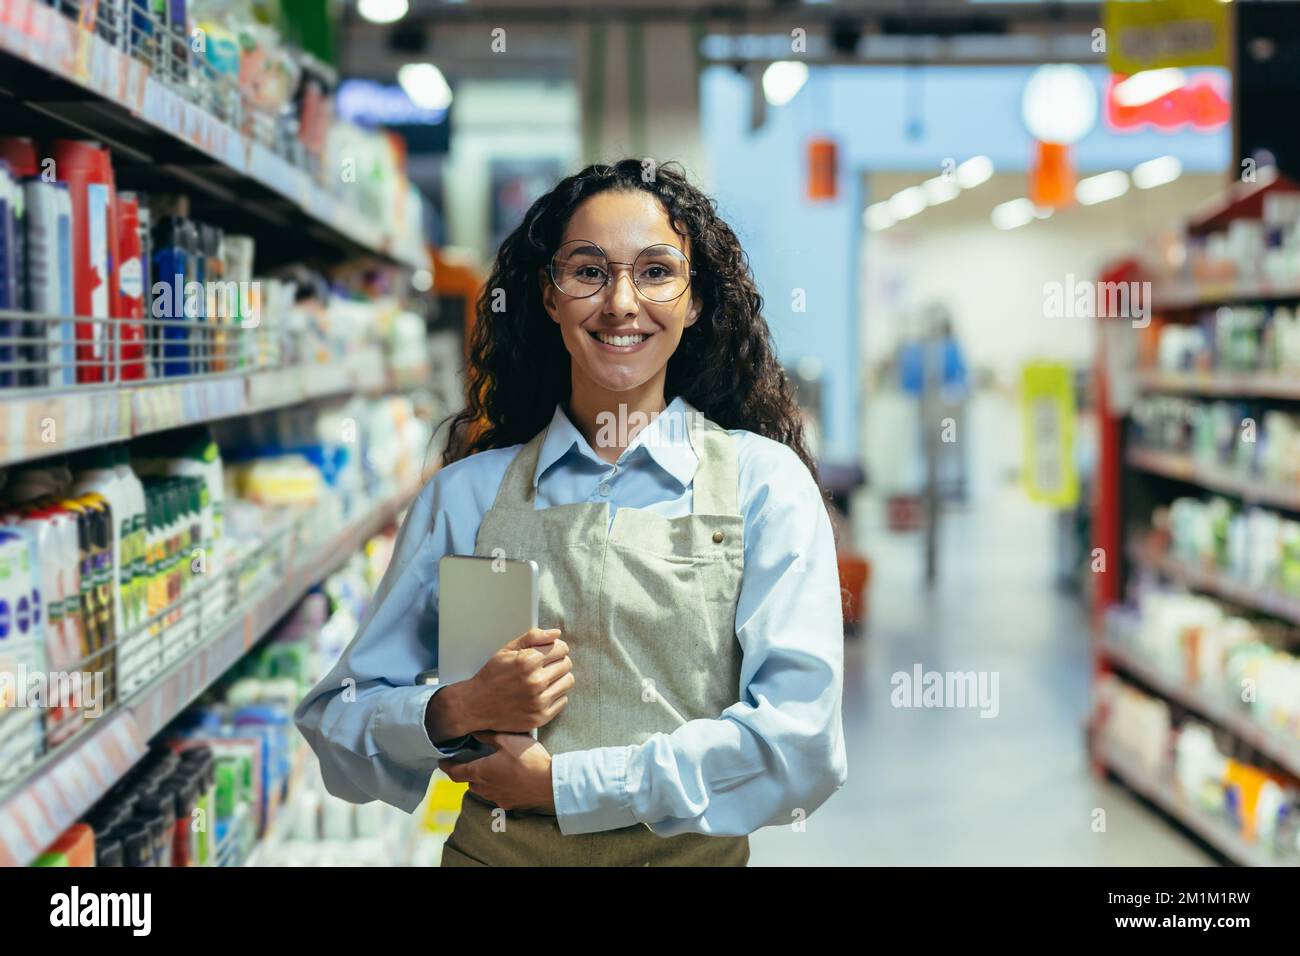 Portrait of a Hispanic female supermarket worker, saleswoman looking at the camera and smiling holding a tablet computer for product inspection, among racks and shelves in a store with goods. Stock Photo